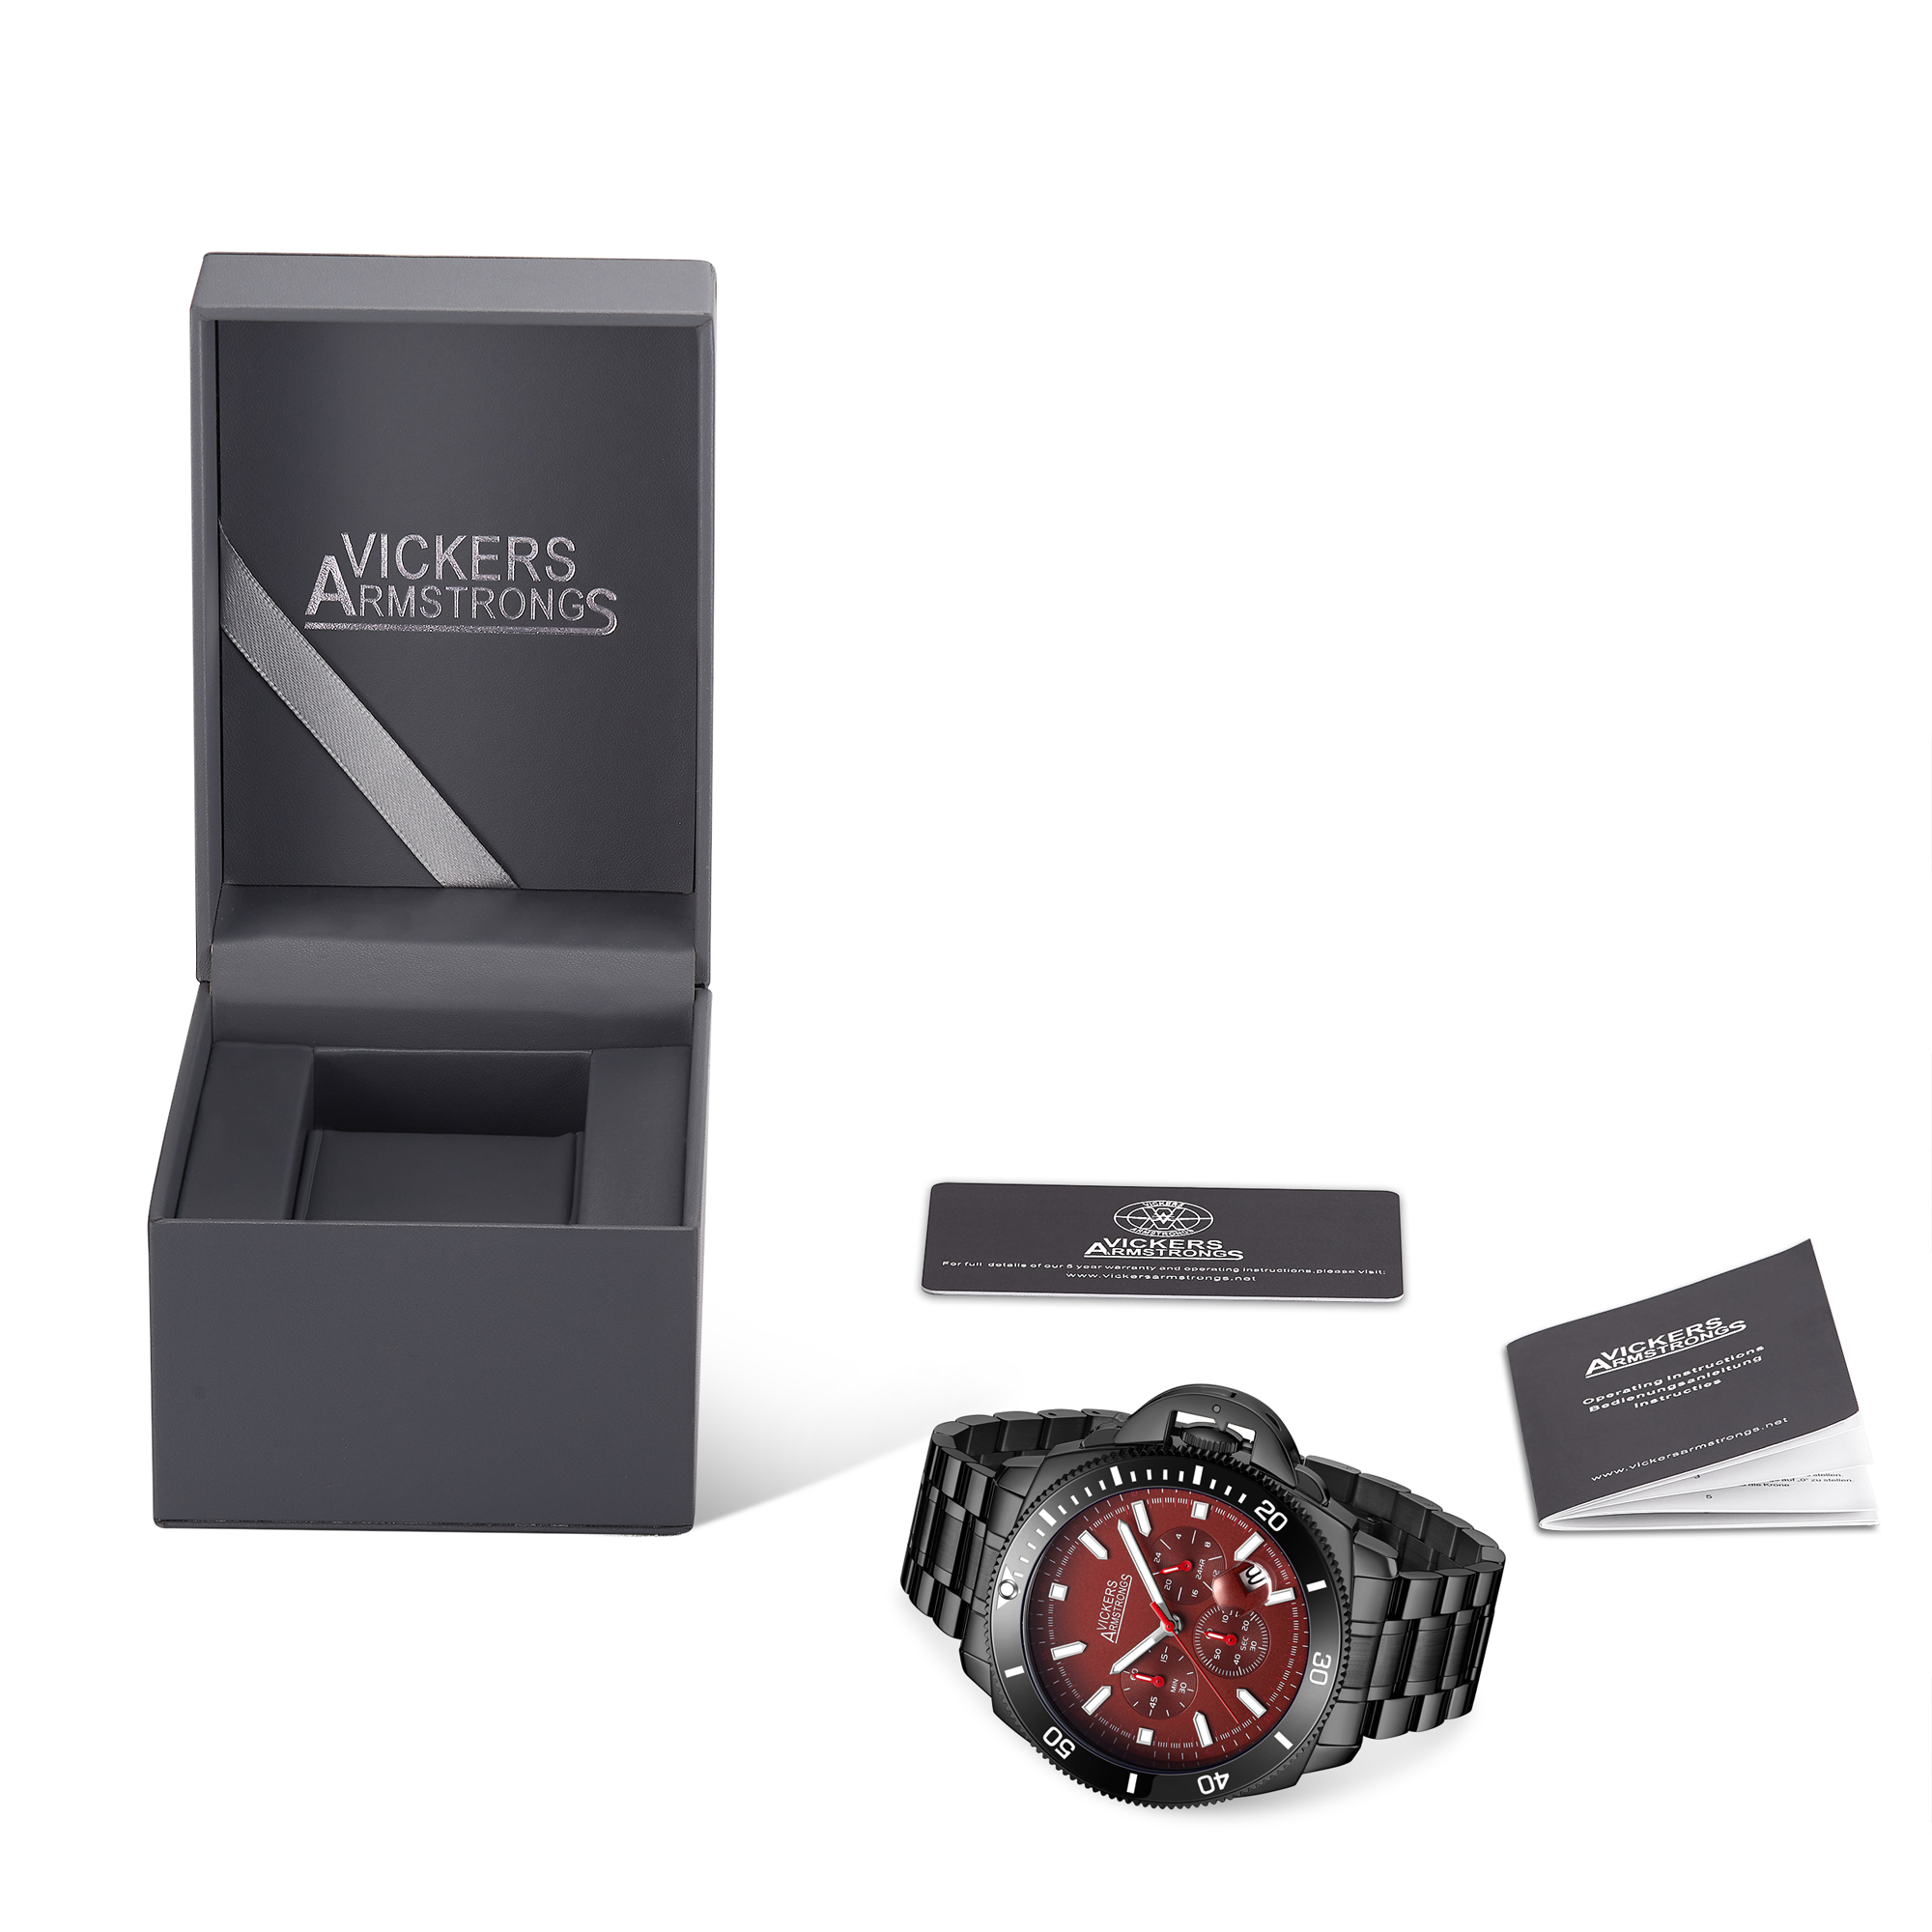 Vickers Armstrongs Limited Edition Hand Assembled Geosphere Black - FREE DELIVERY & 5 YEAR WARRANTY